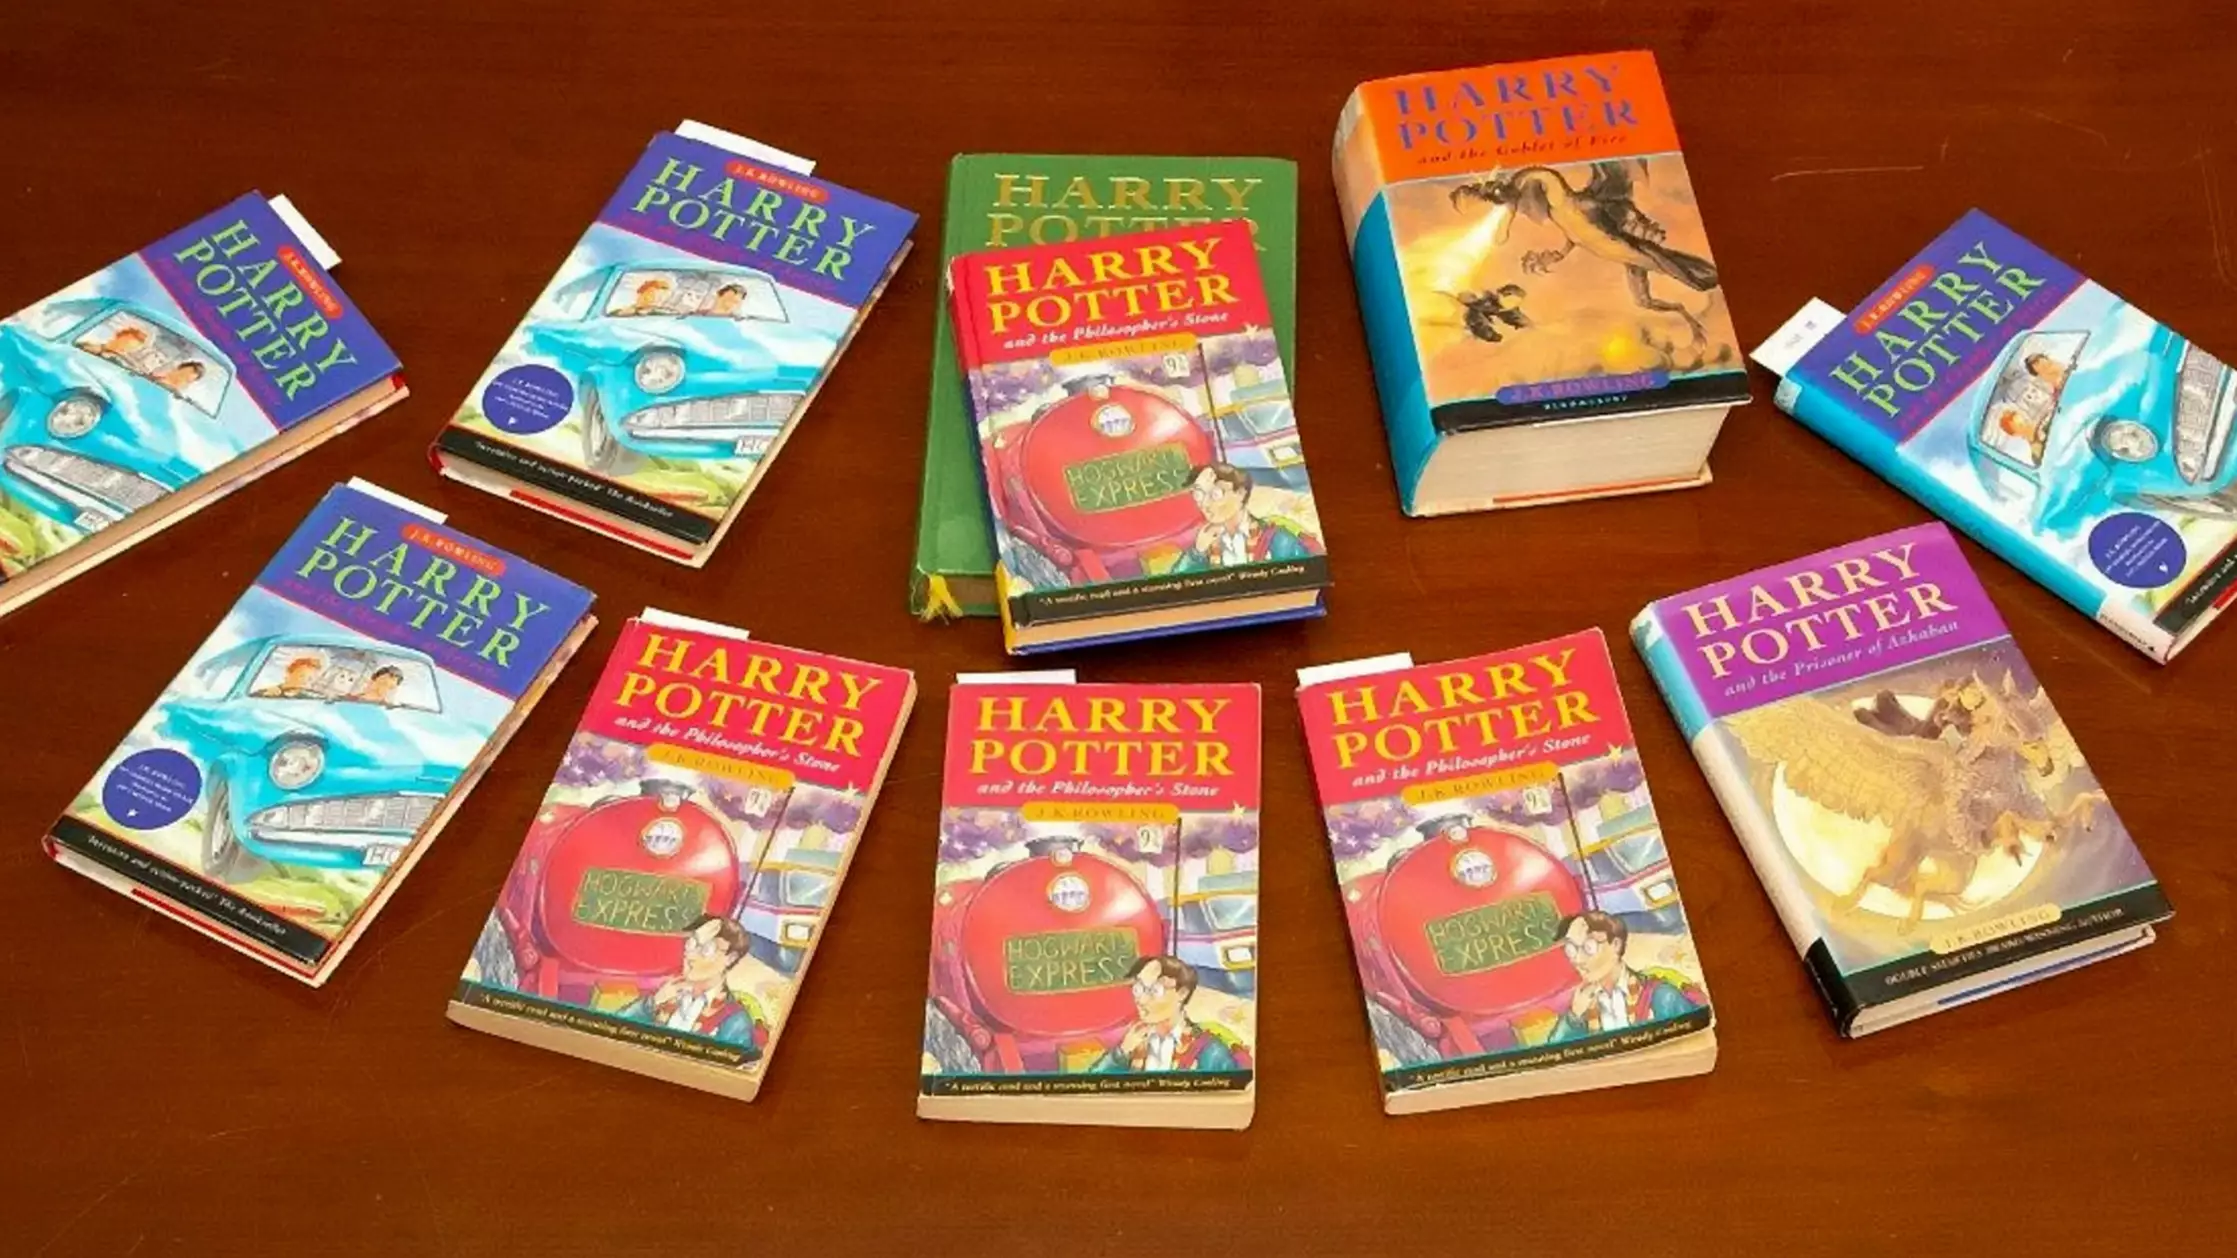 Rare Harry Potter Book Bought For 28p Sells For £28,000 On Bargain Hunt